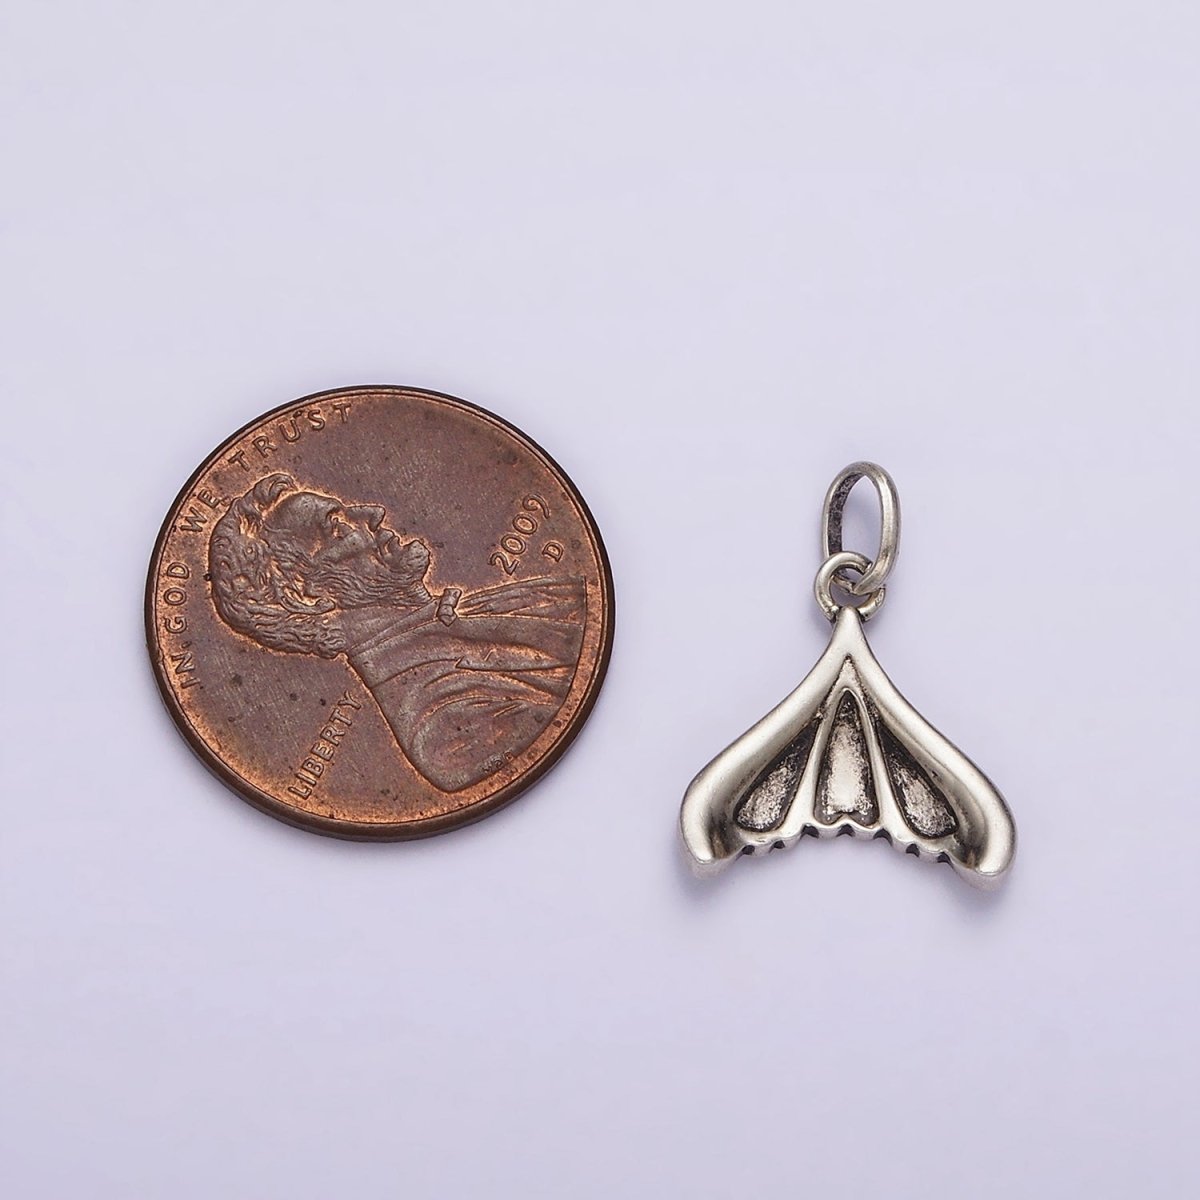 Mini Mermaid Tail Charm Coin Whale Pendant in 925 Sterling Silver Pendant SL-316 - DLUXCA